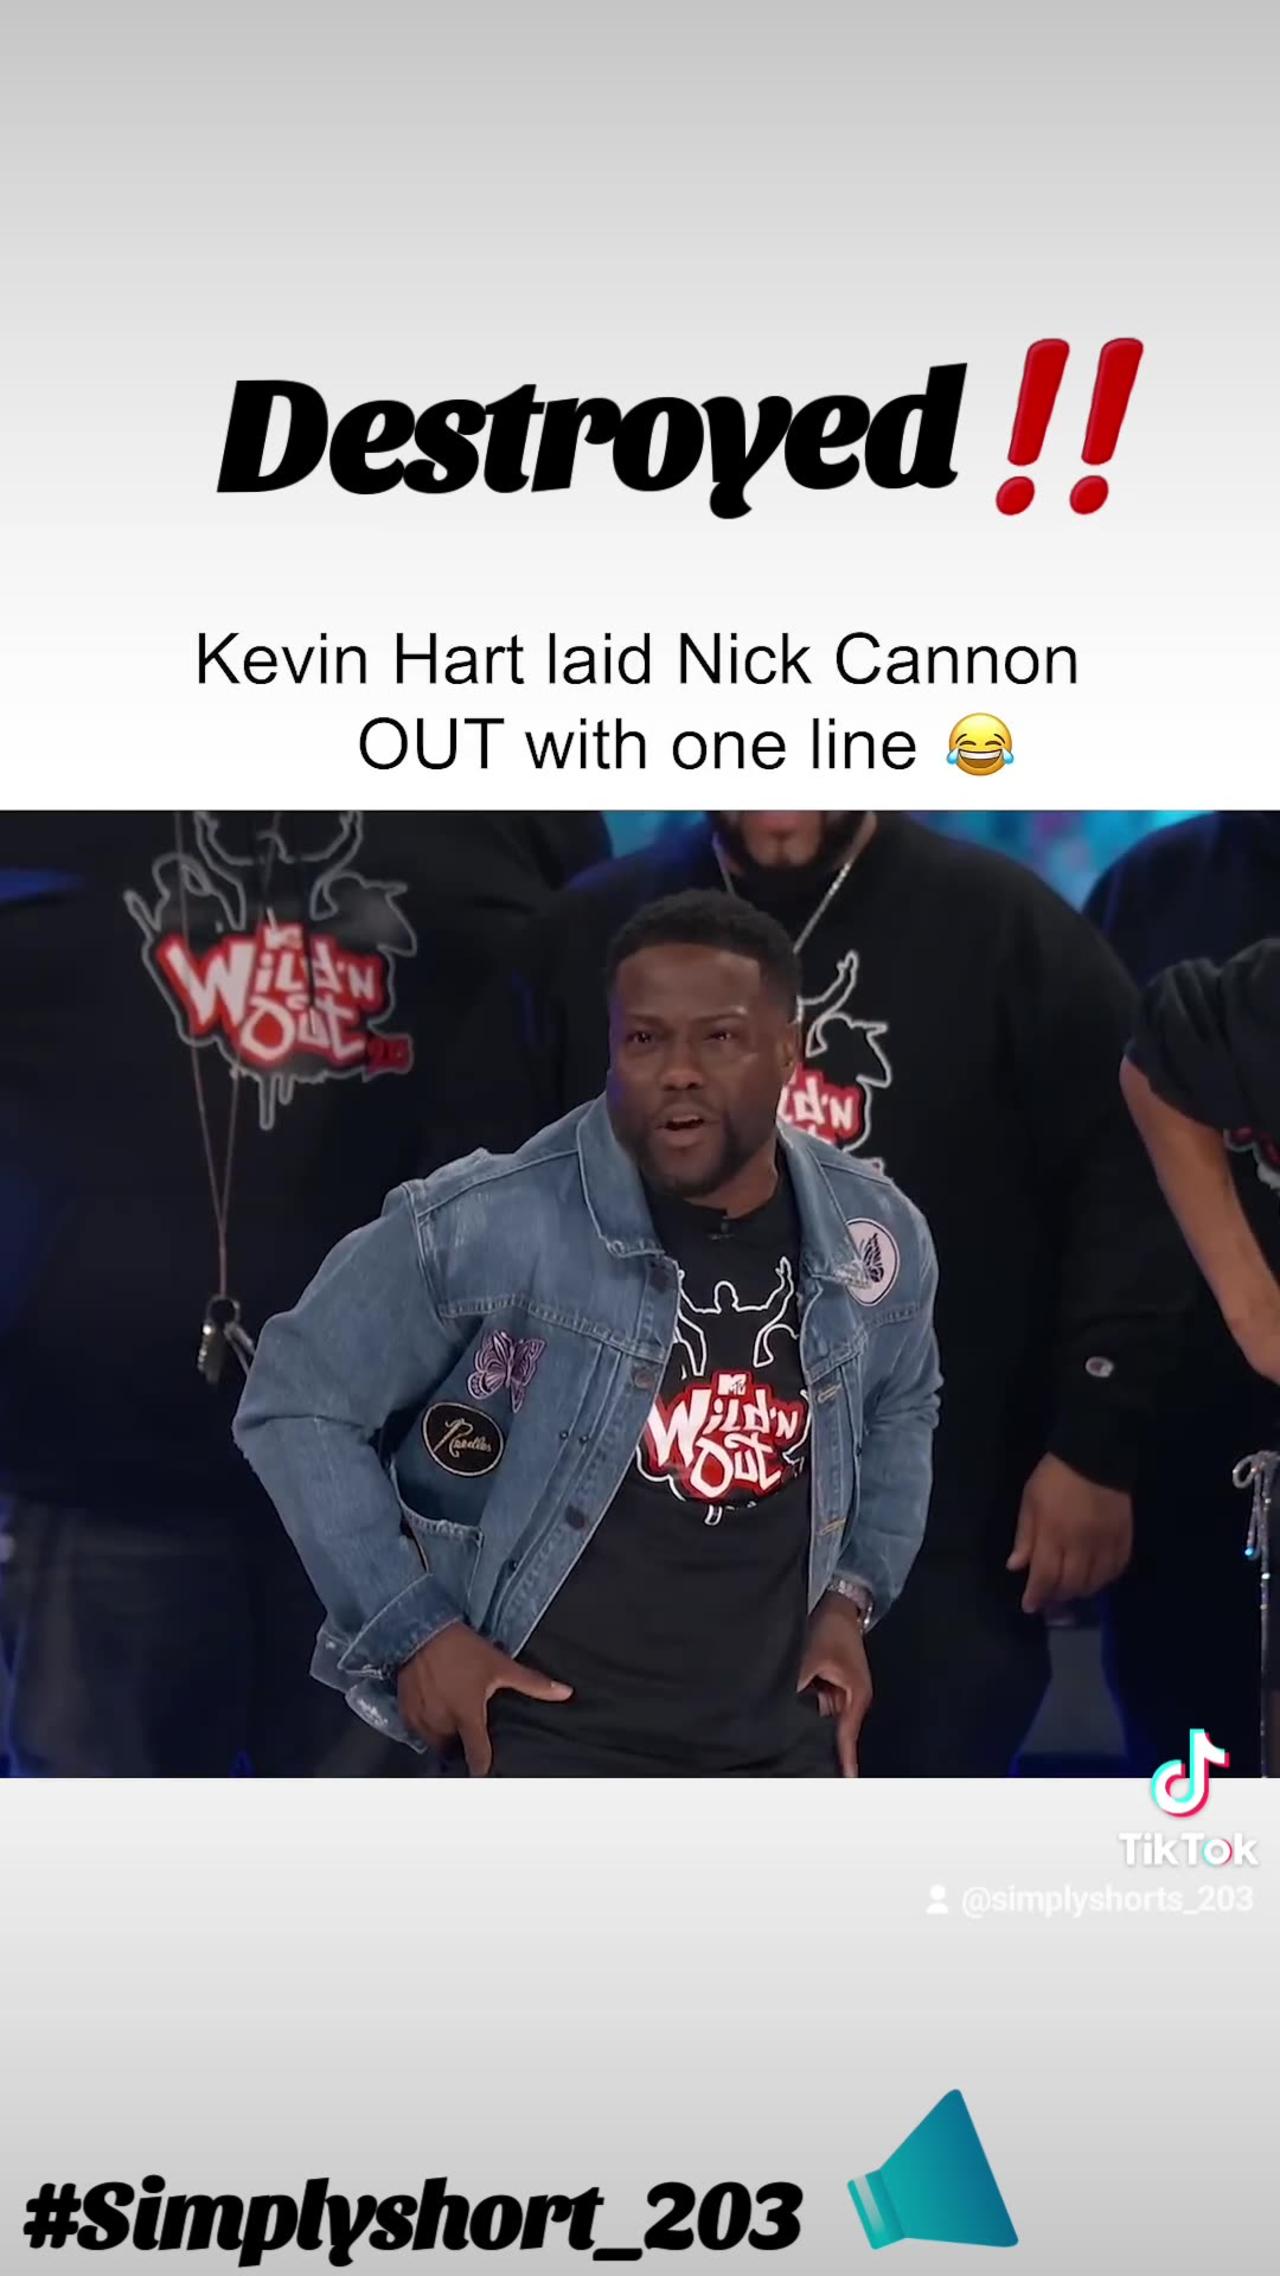 Kevin hart on MTVs wild & Out